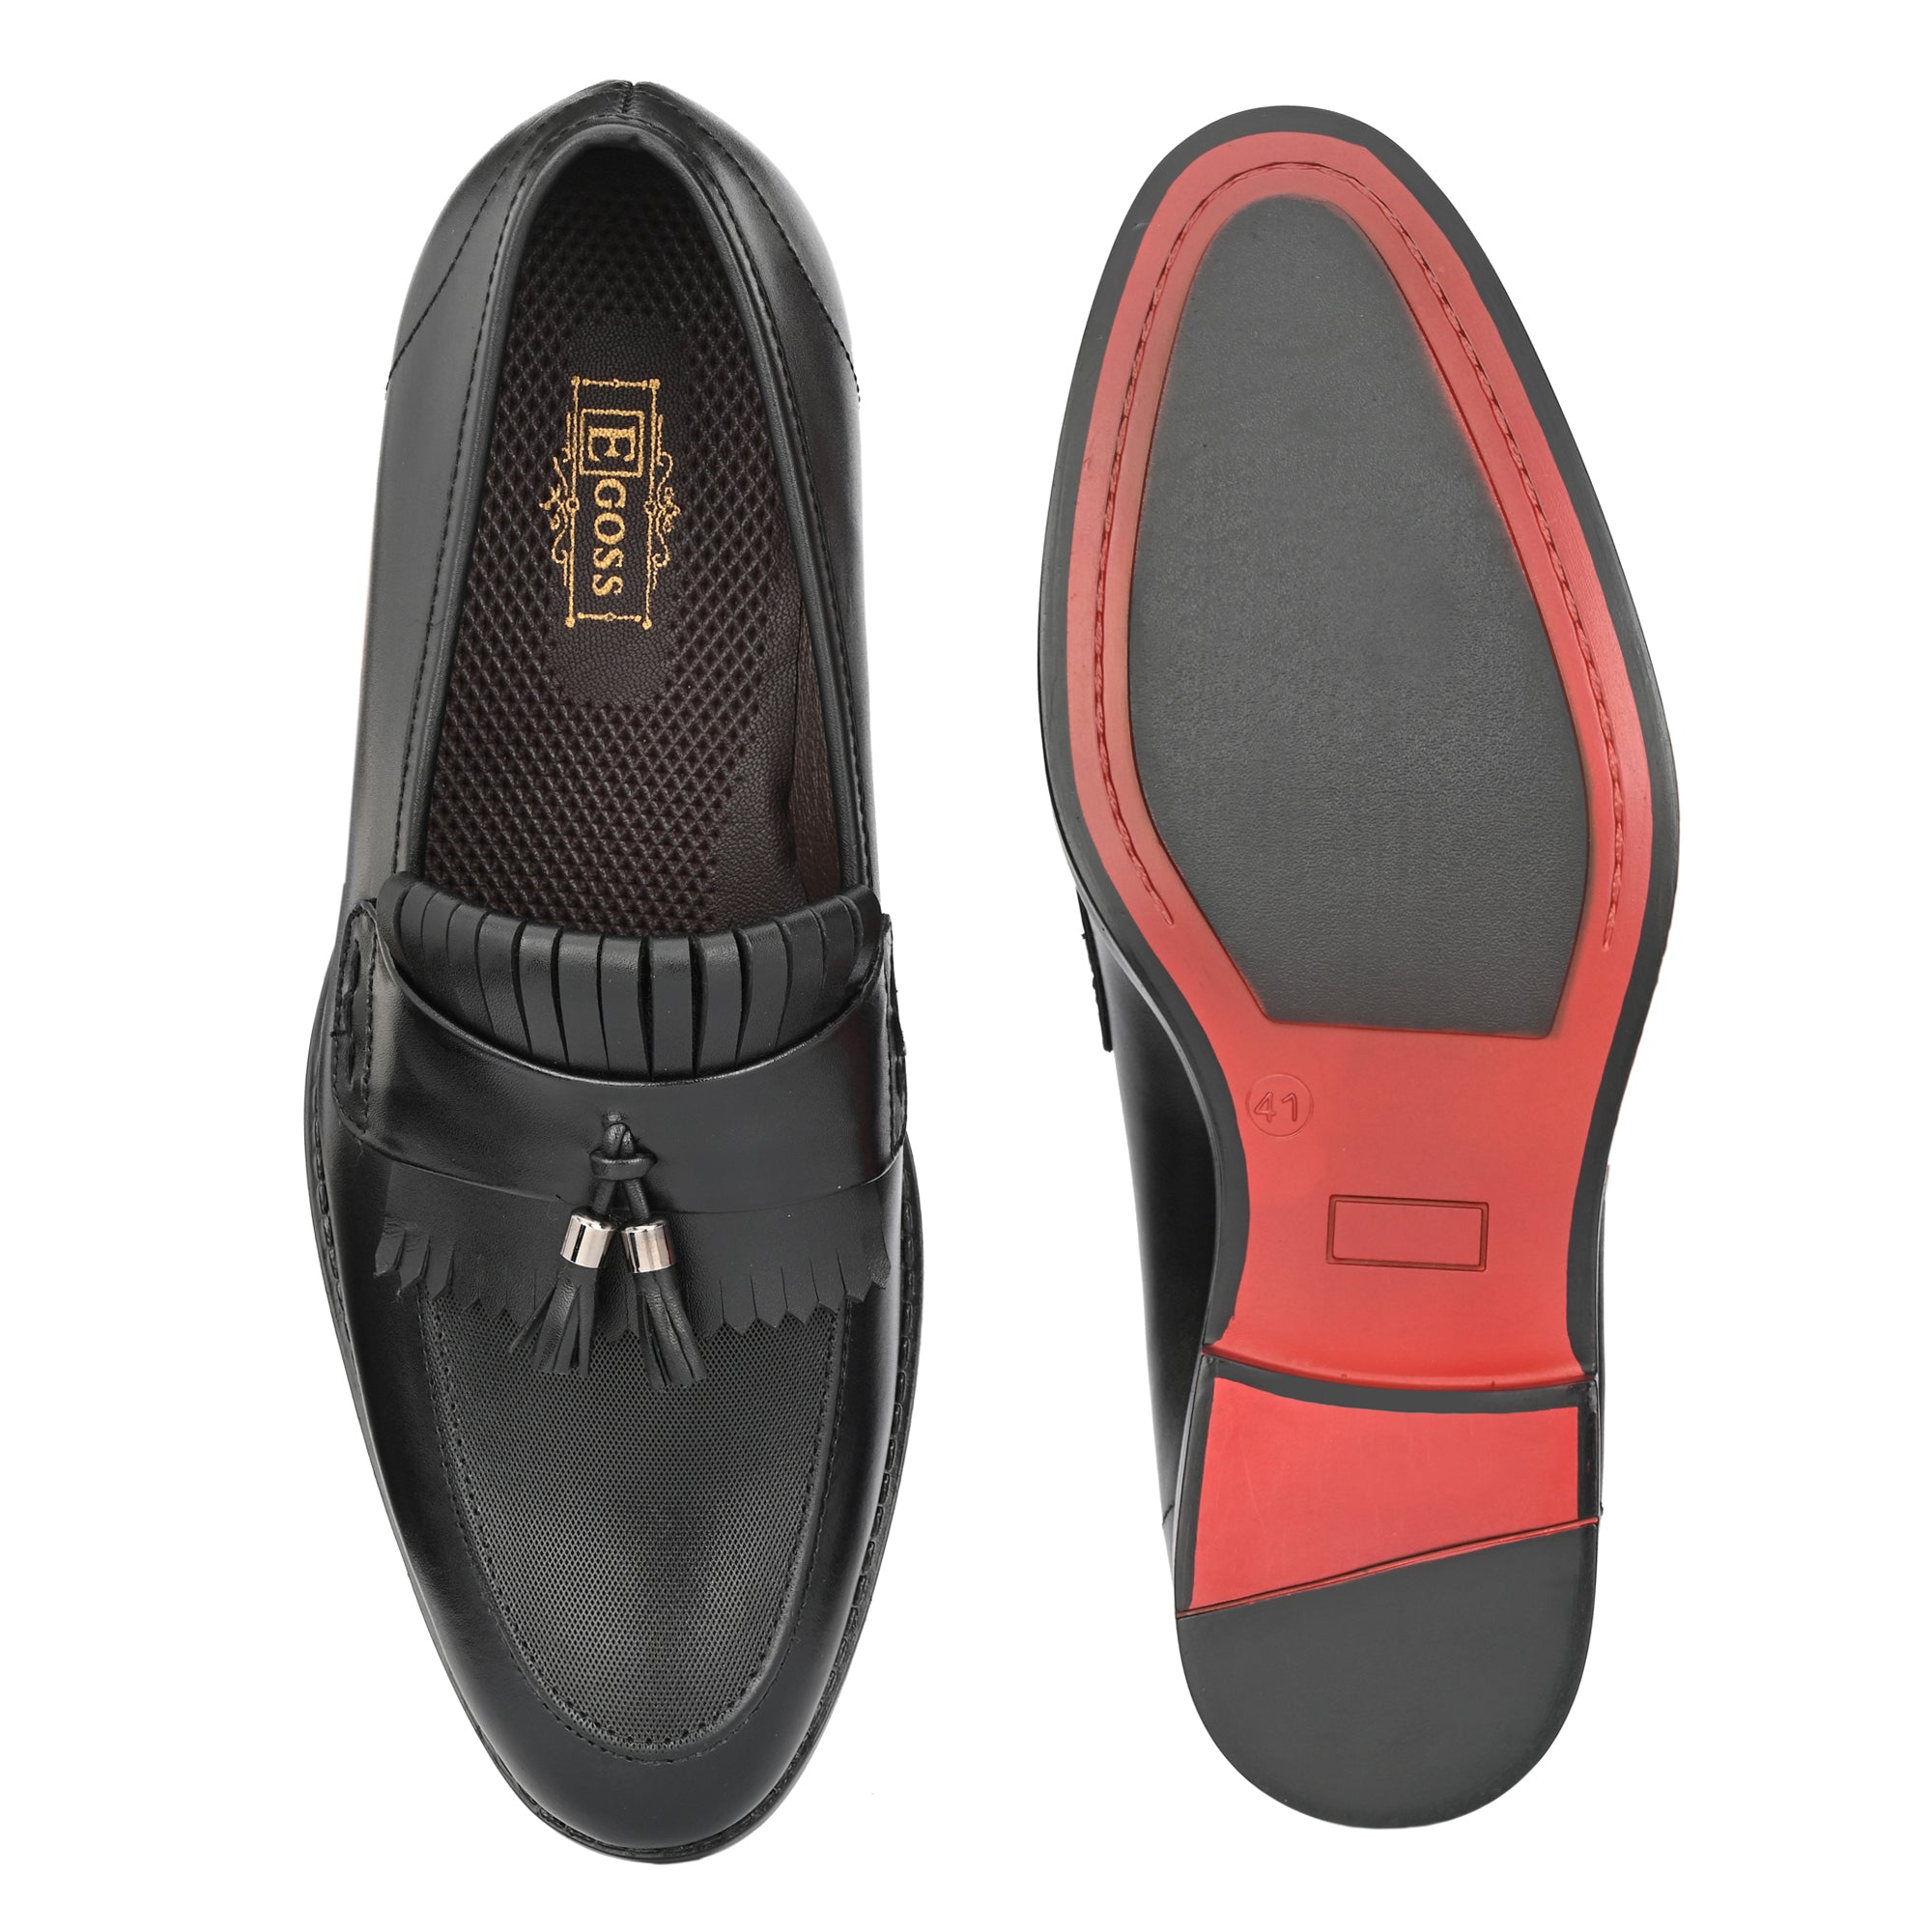 Tassled Formal Penny Loafers For Men with Textured Top